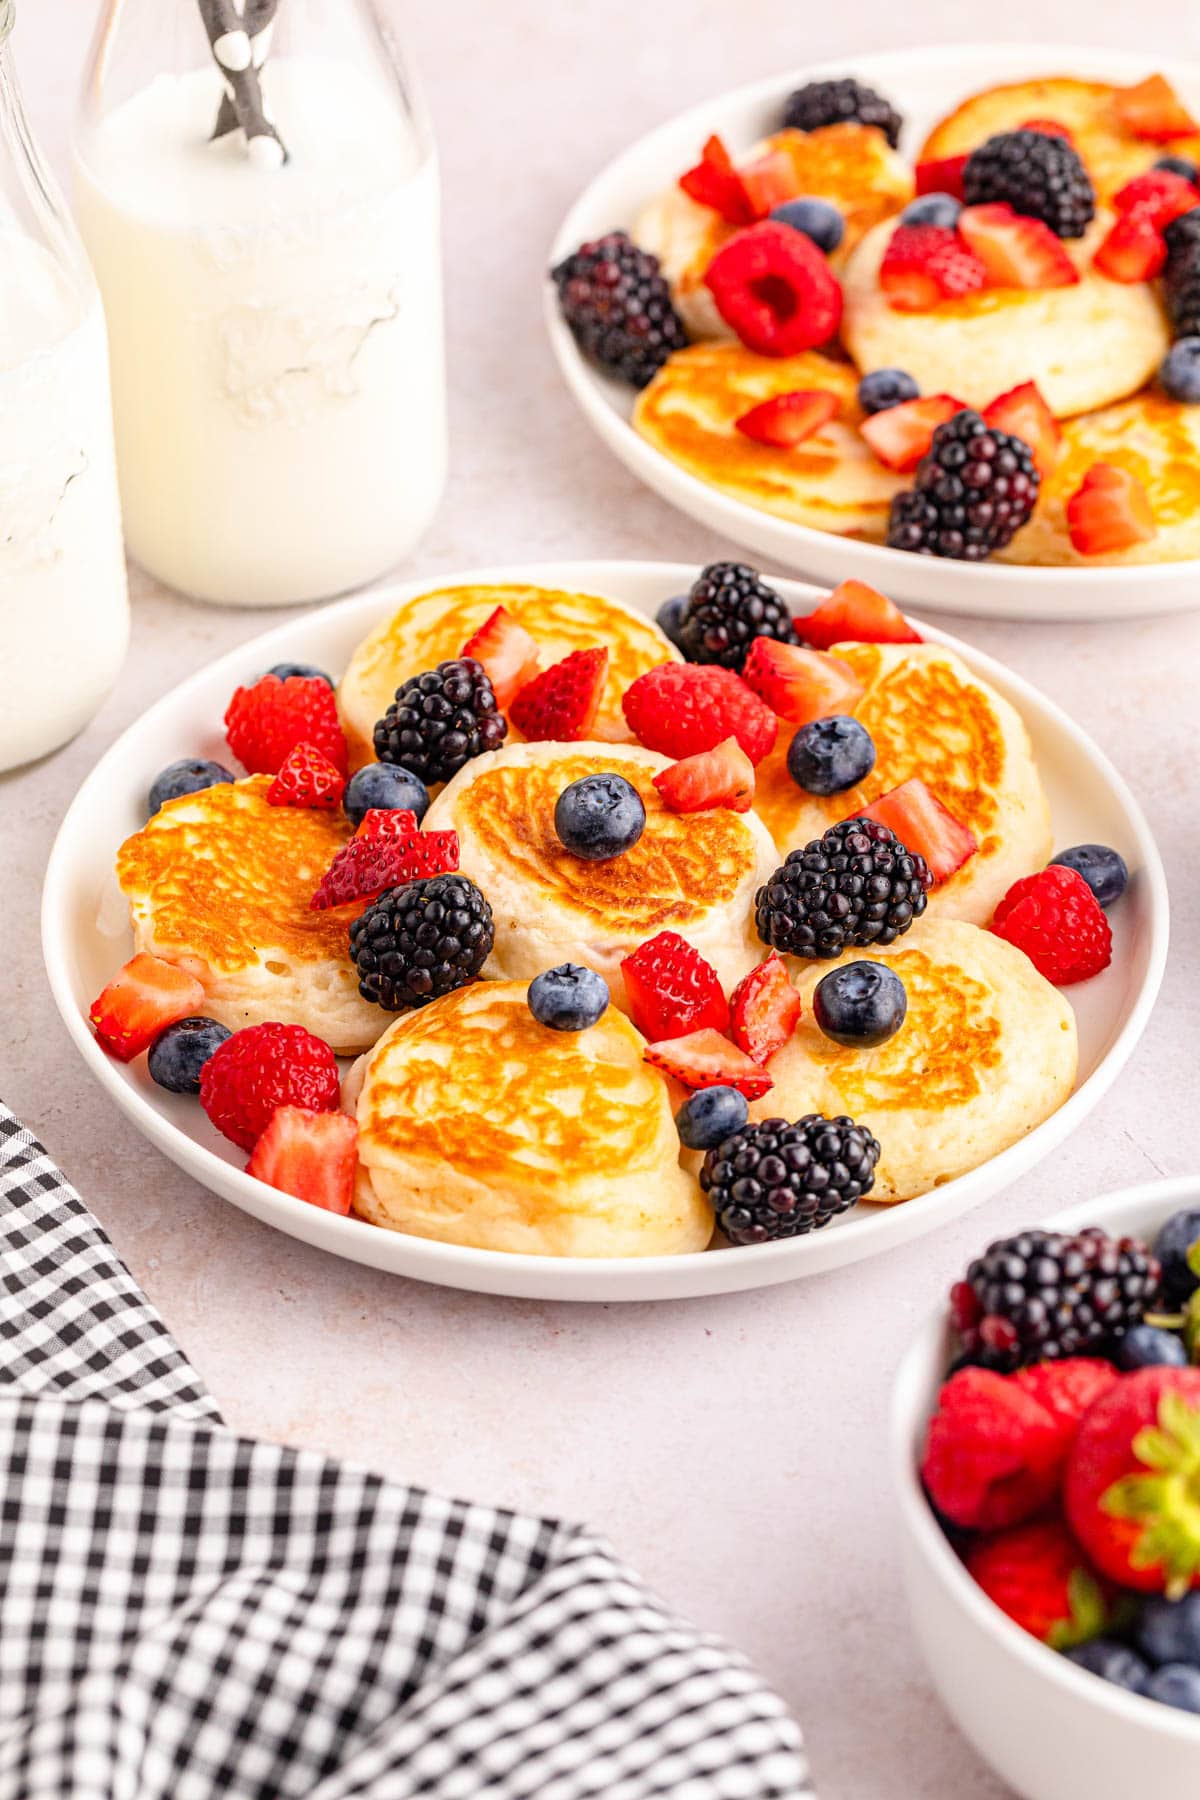 A plate of pancakes with berries and milk.